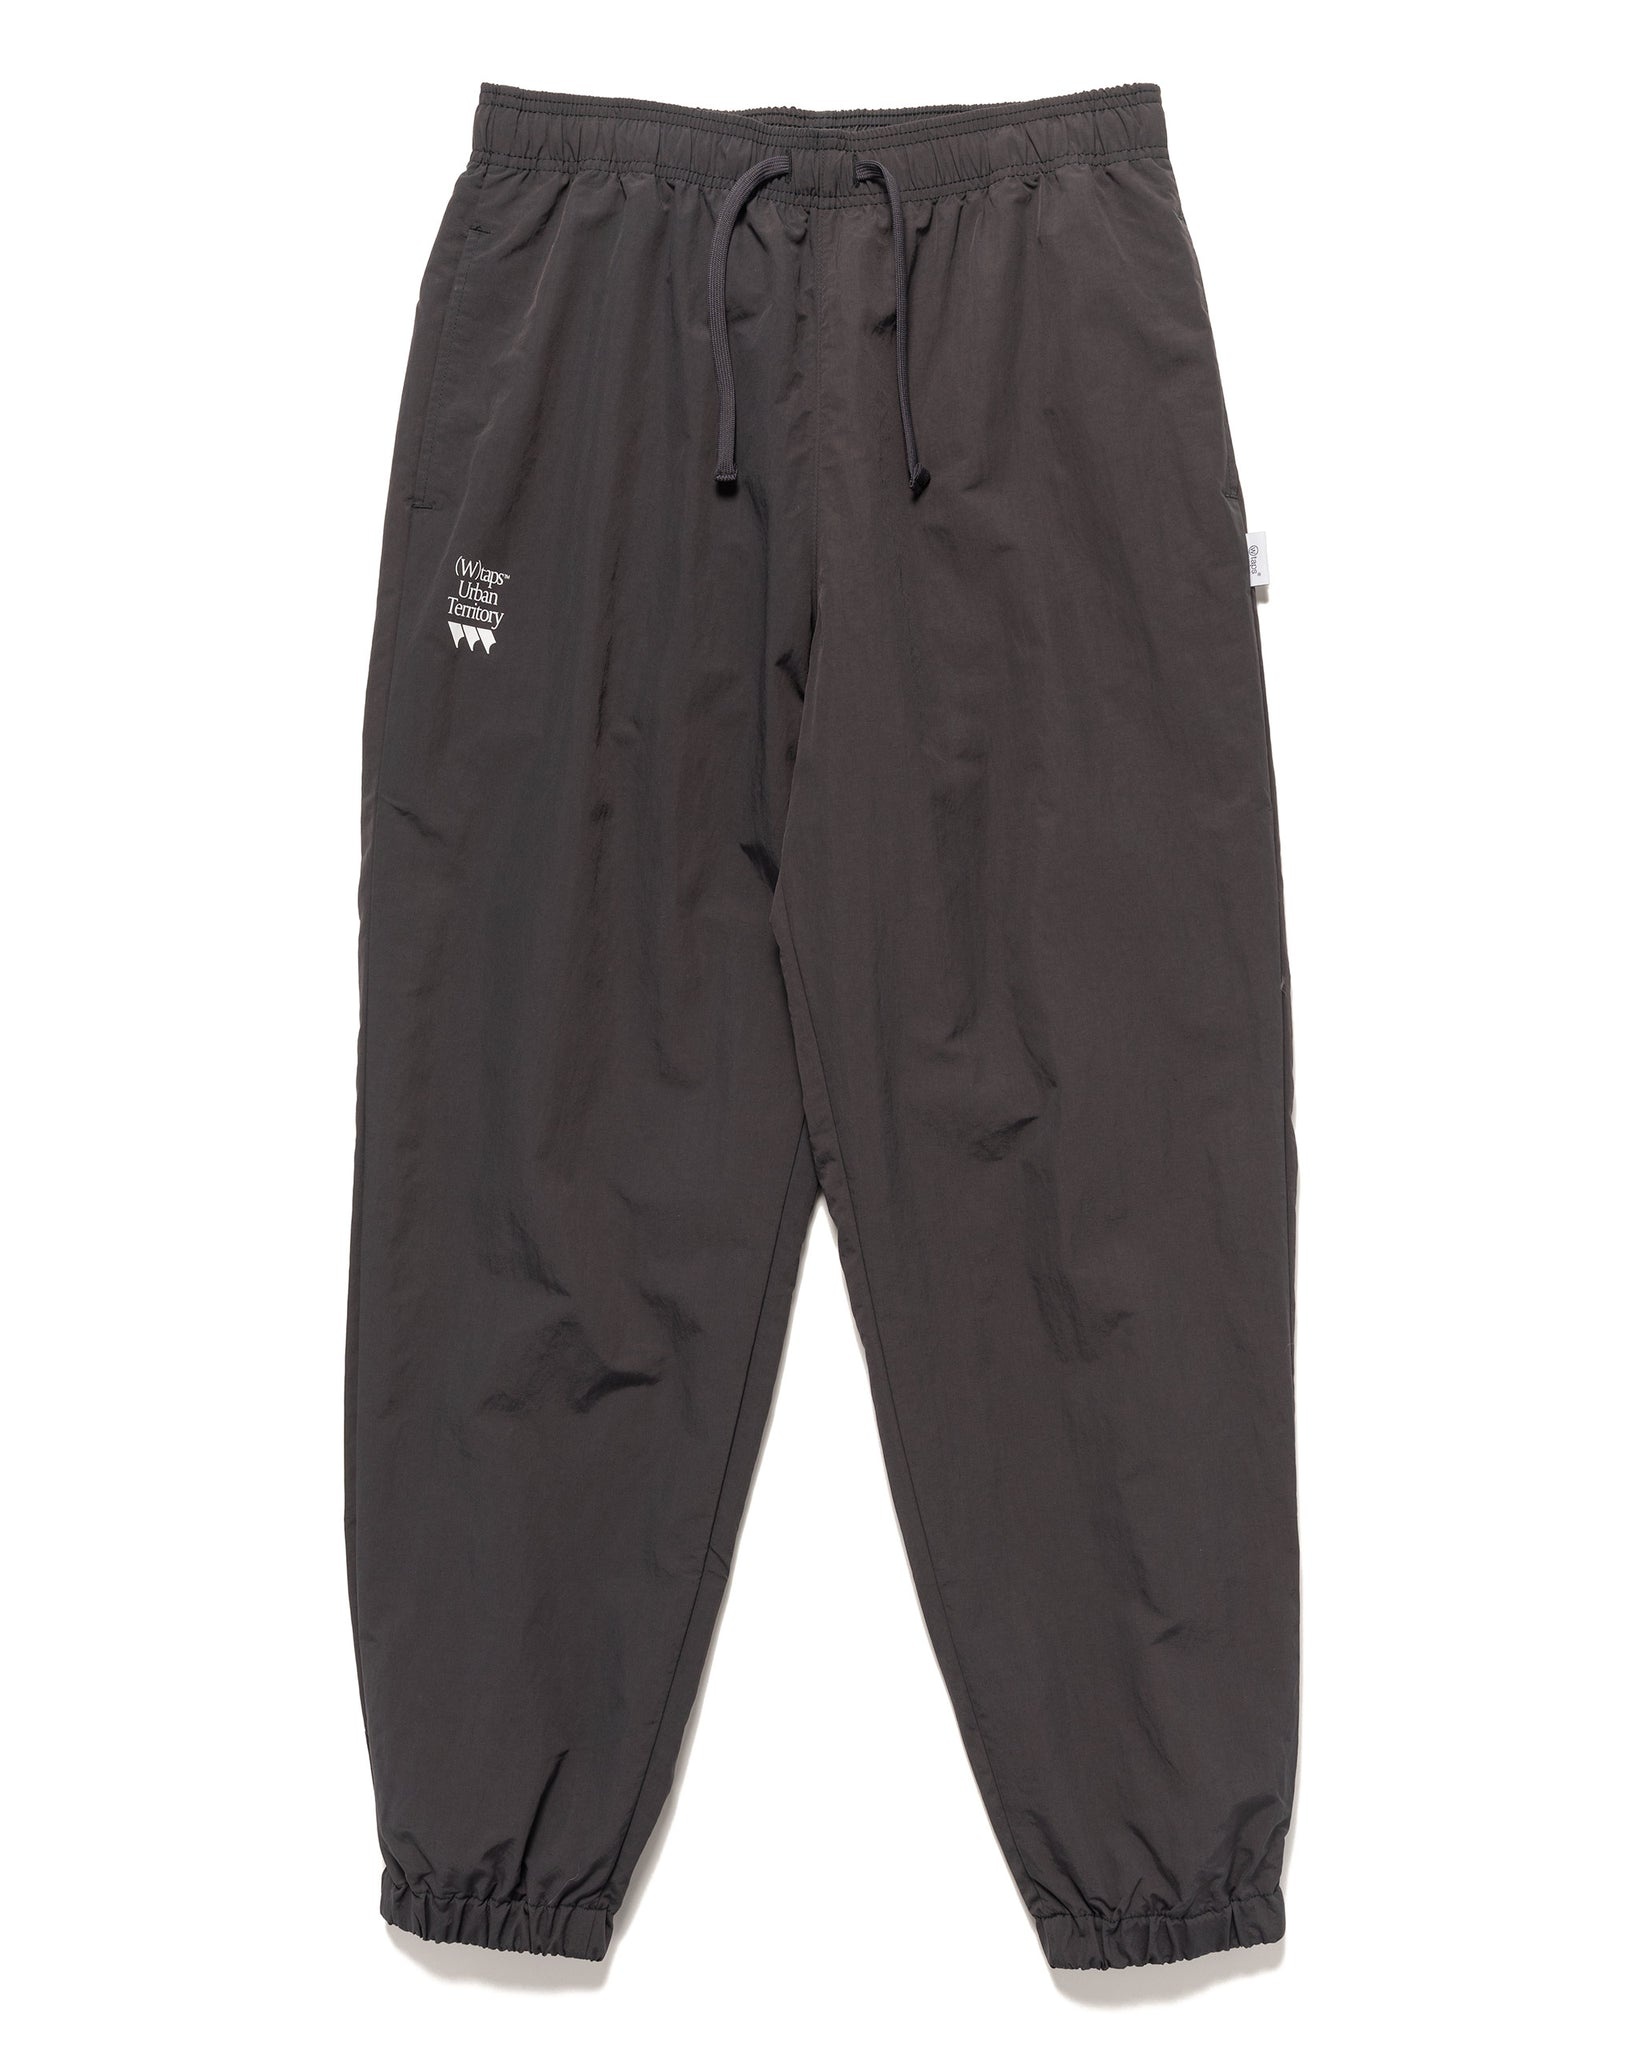 WTAPS SPST2001 / Trousers / Nylon. Weather Charcoal | havenshop | REVERSIBLE